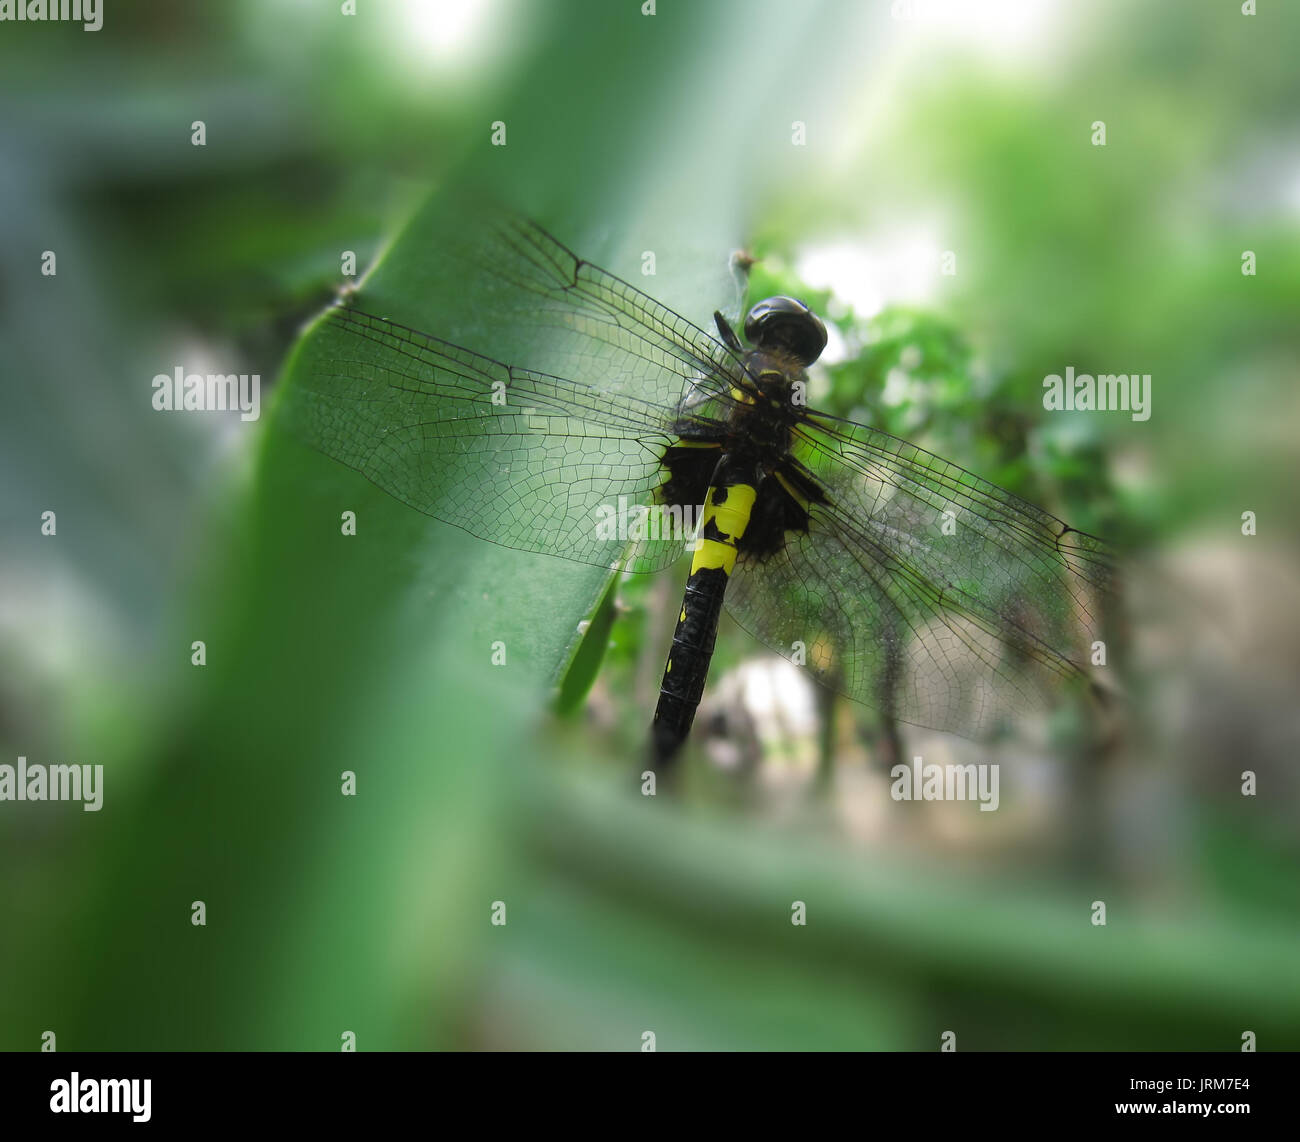 the colorful dragonfly perched on the dragon in the garden Stock Photo